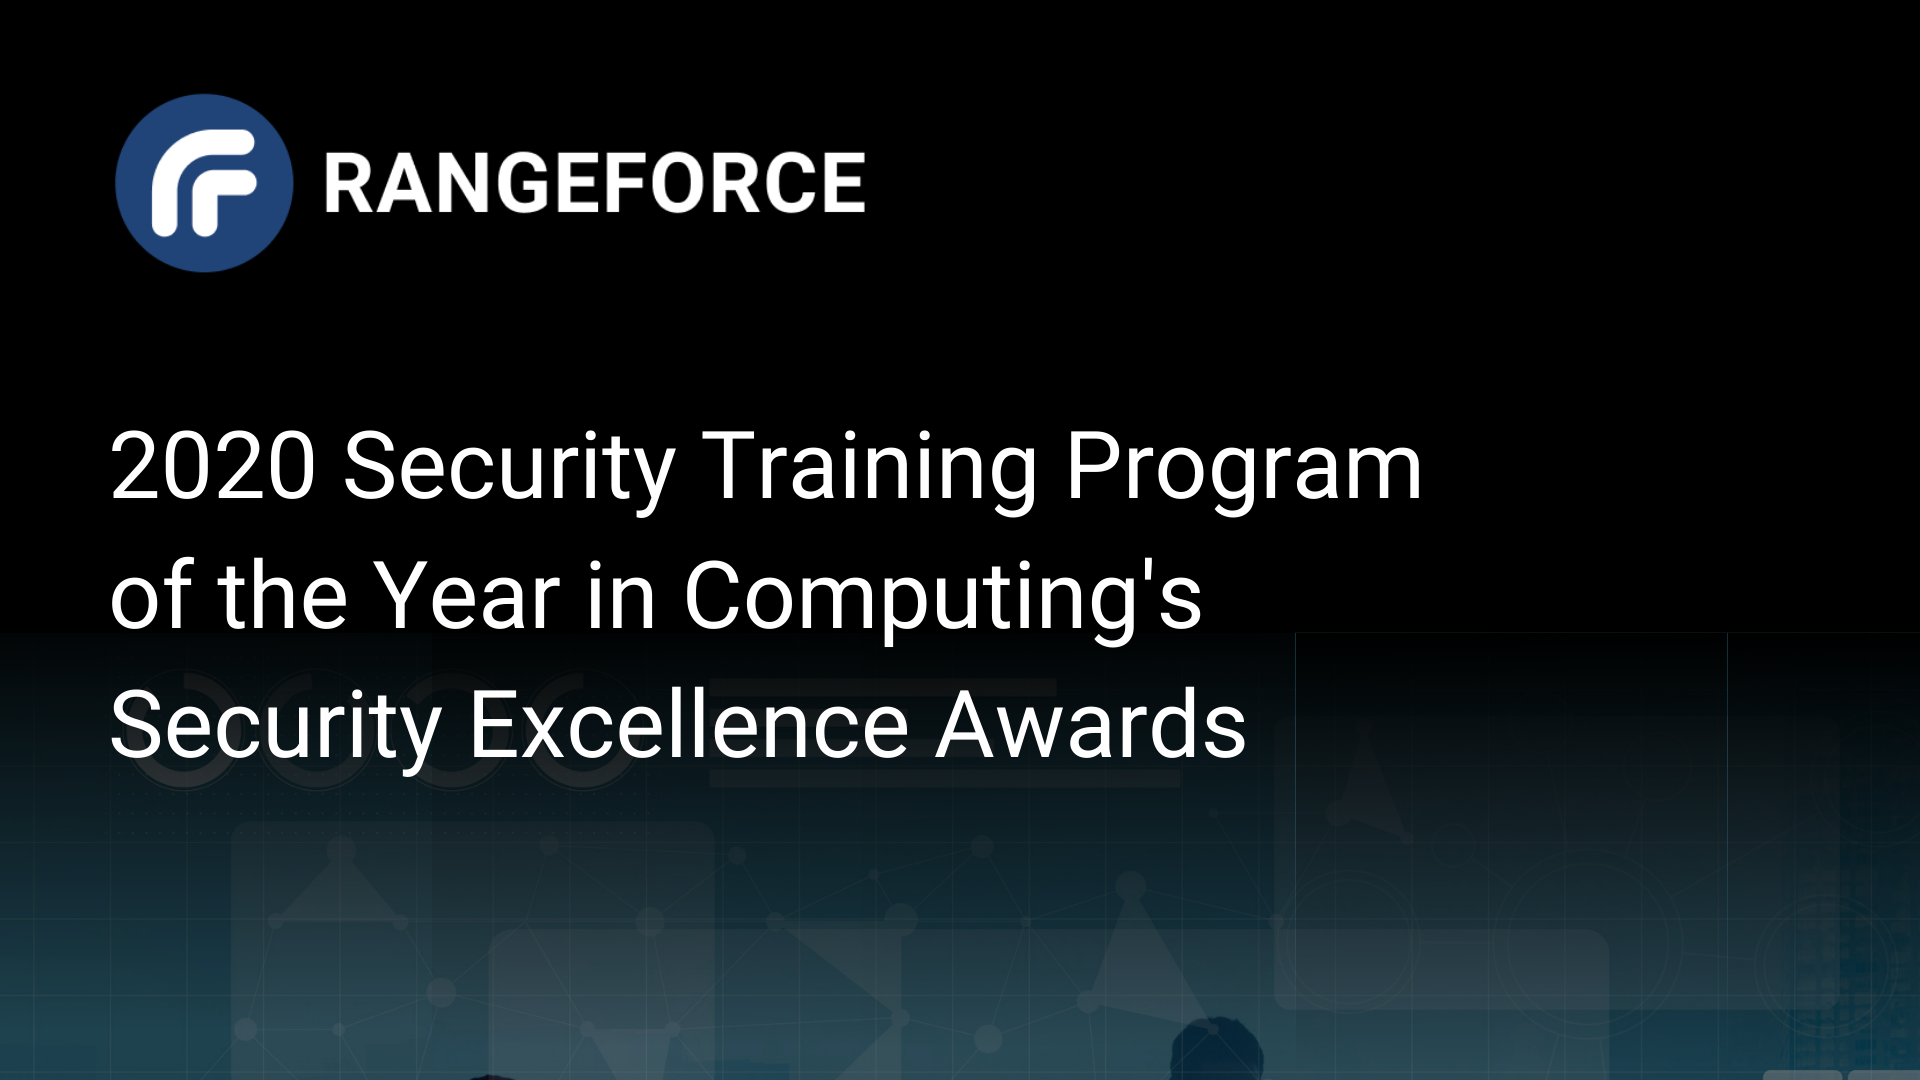 RangeForce Named Security Training Program of the Year in Computing Security Excellence Awards